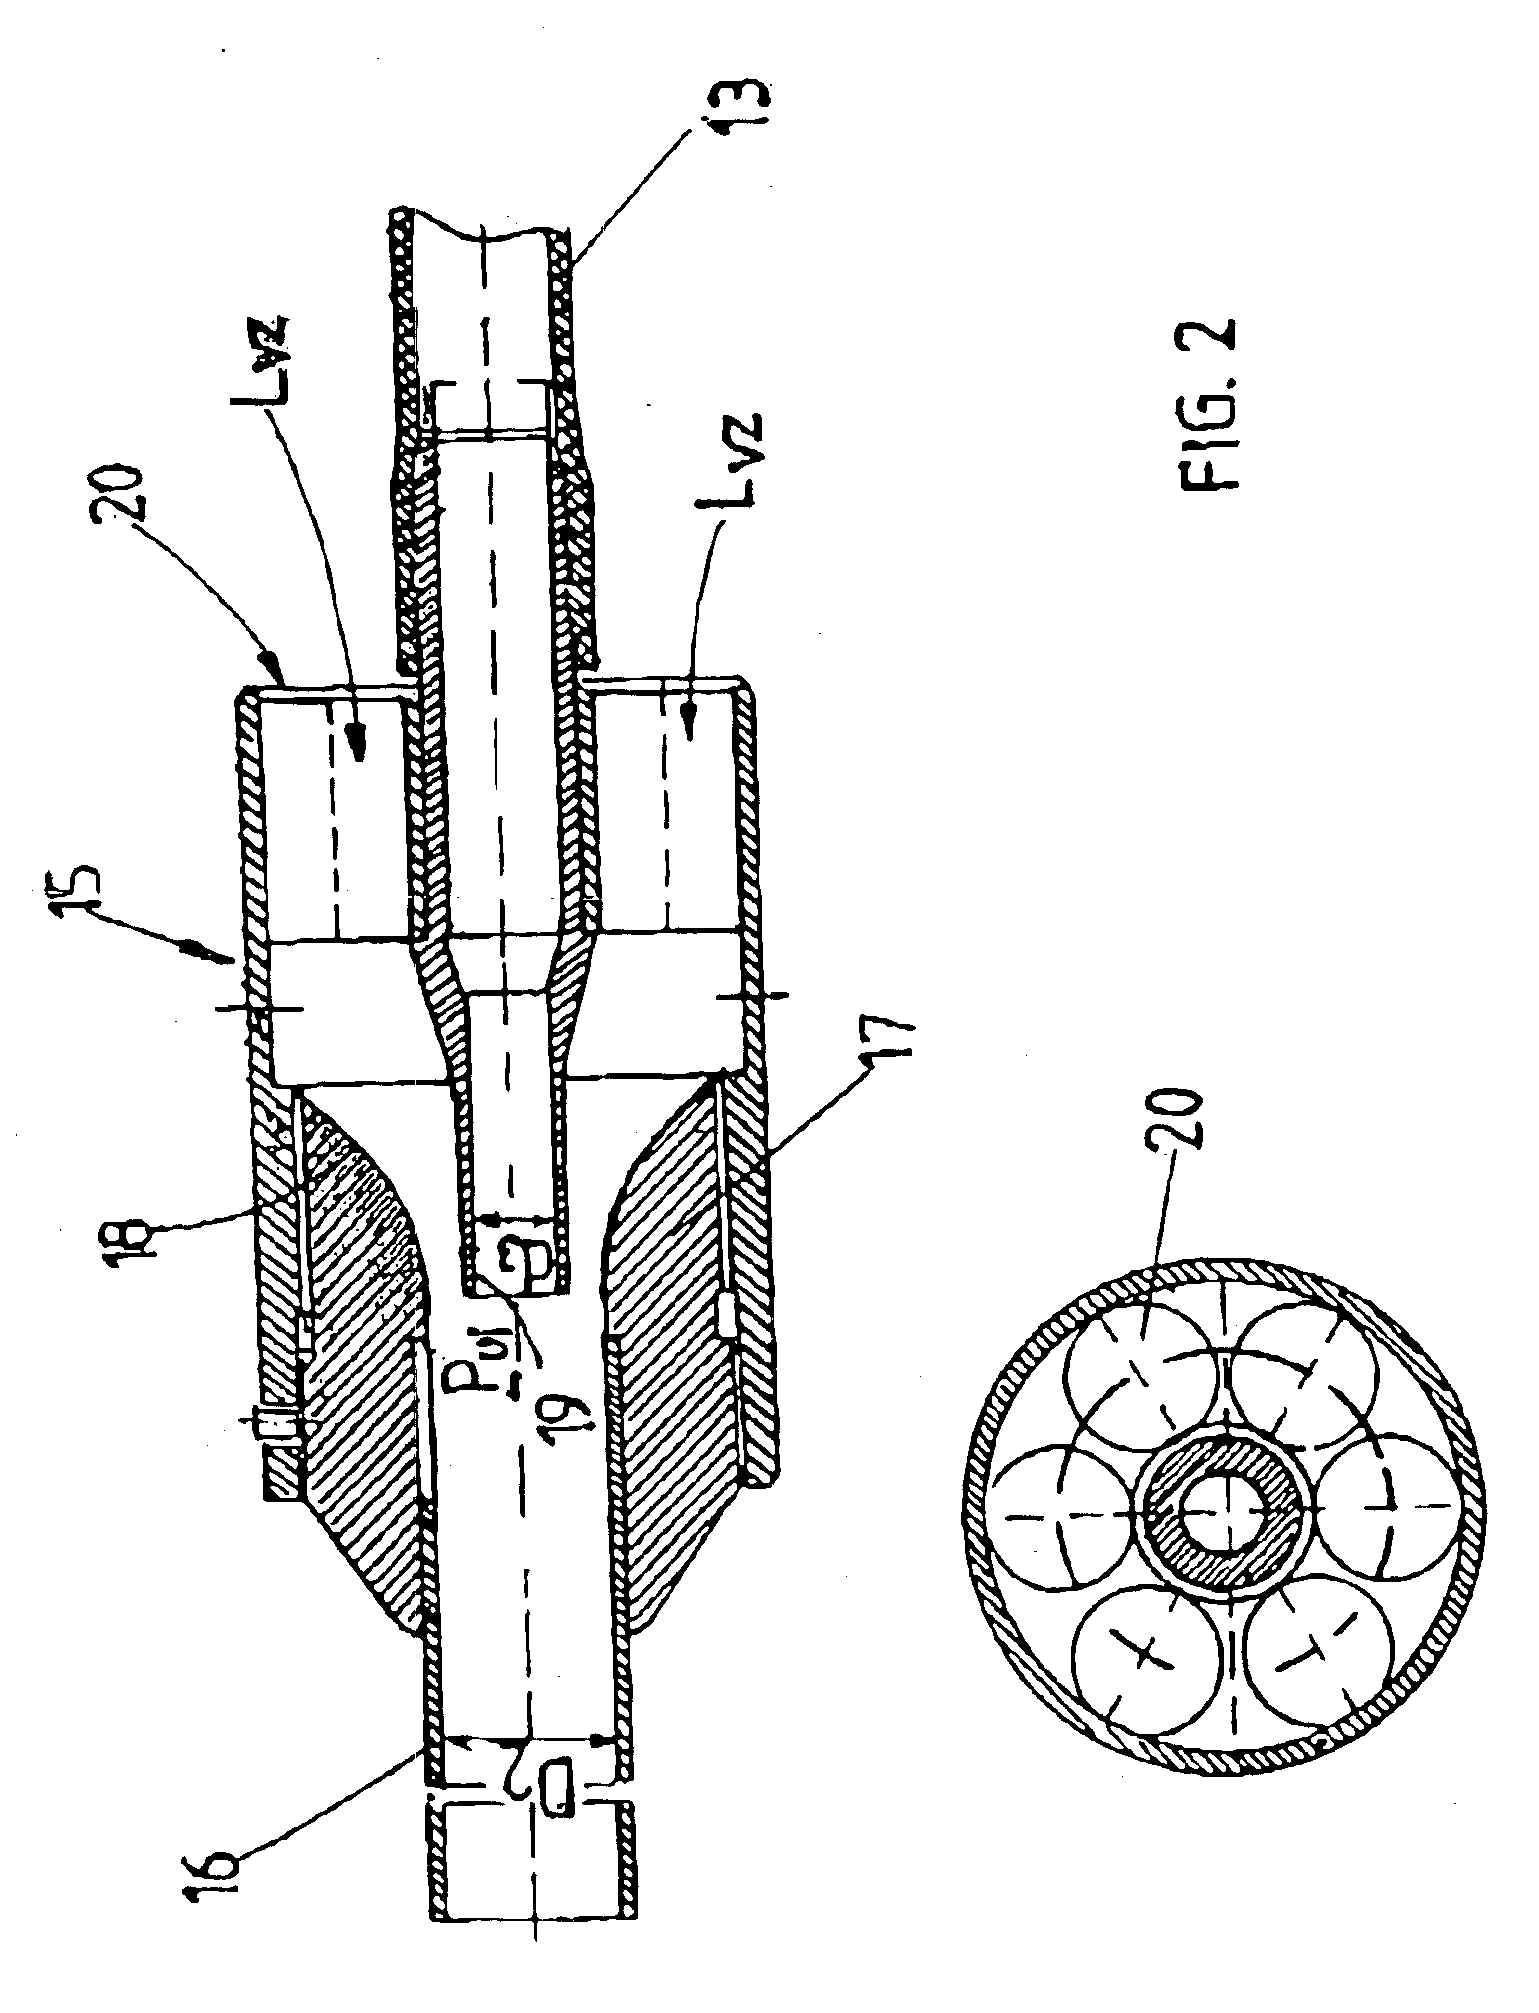 Method and device for sandblasting, especially removing in a precise manner and/or compacting and/or coating solid surfaces